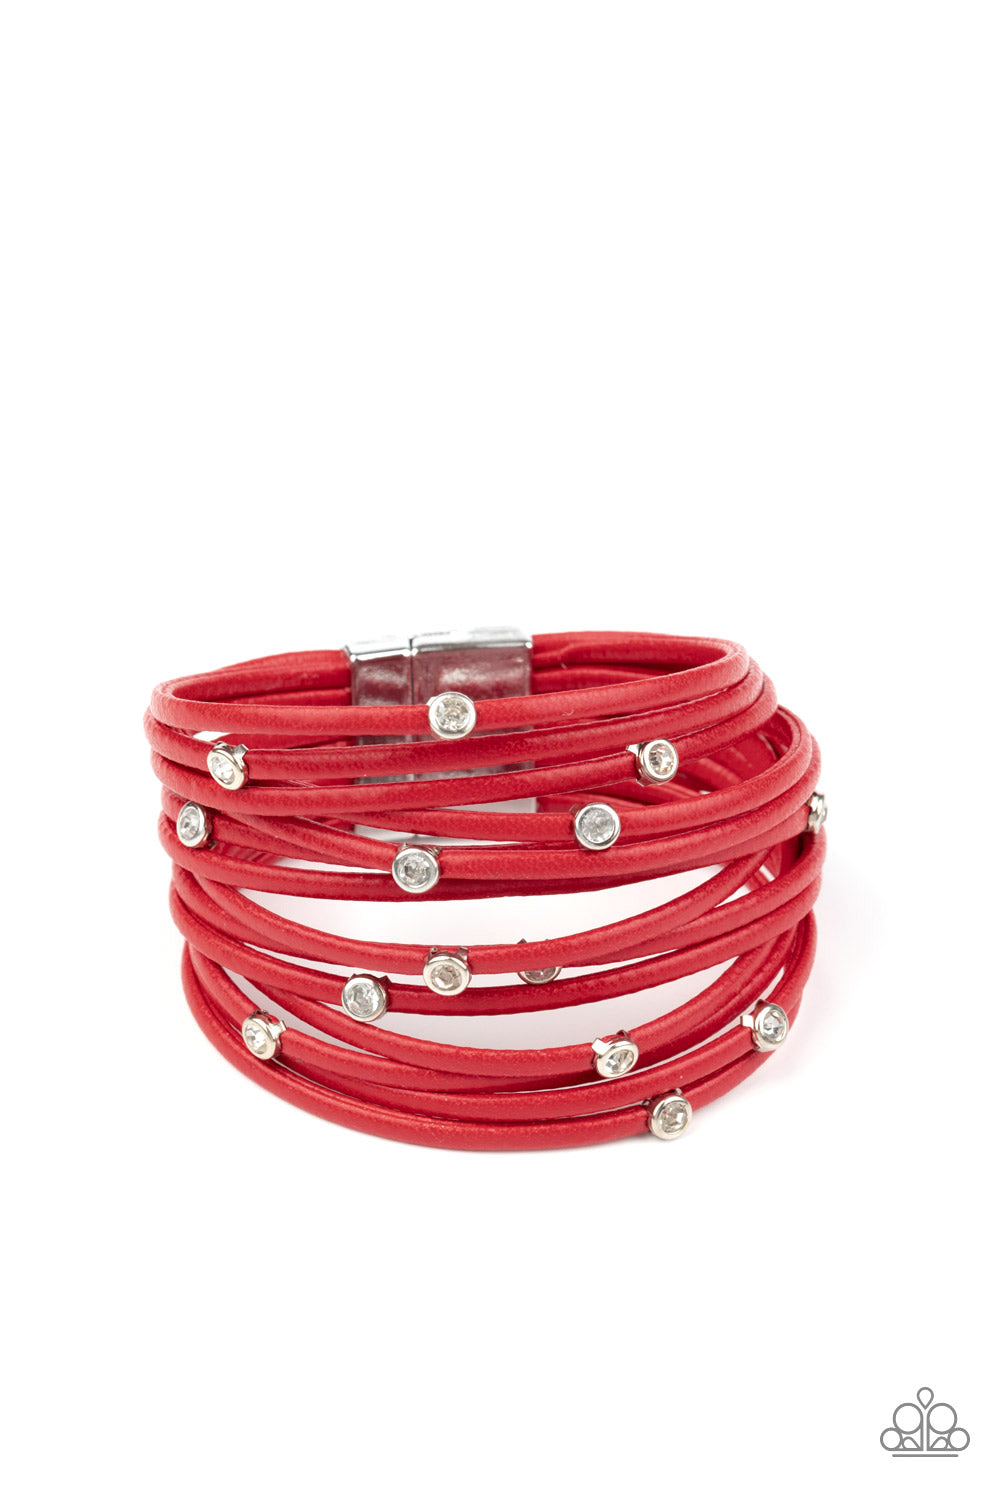 Fearlessly Layered - Red